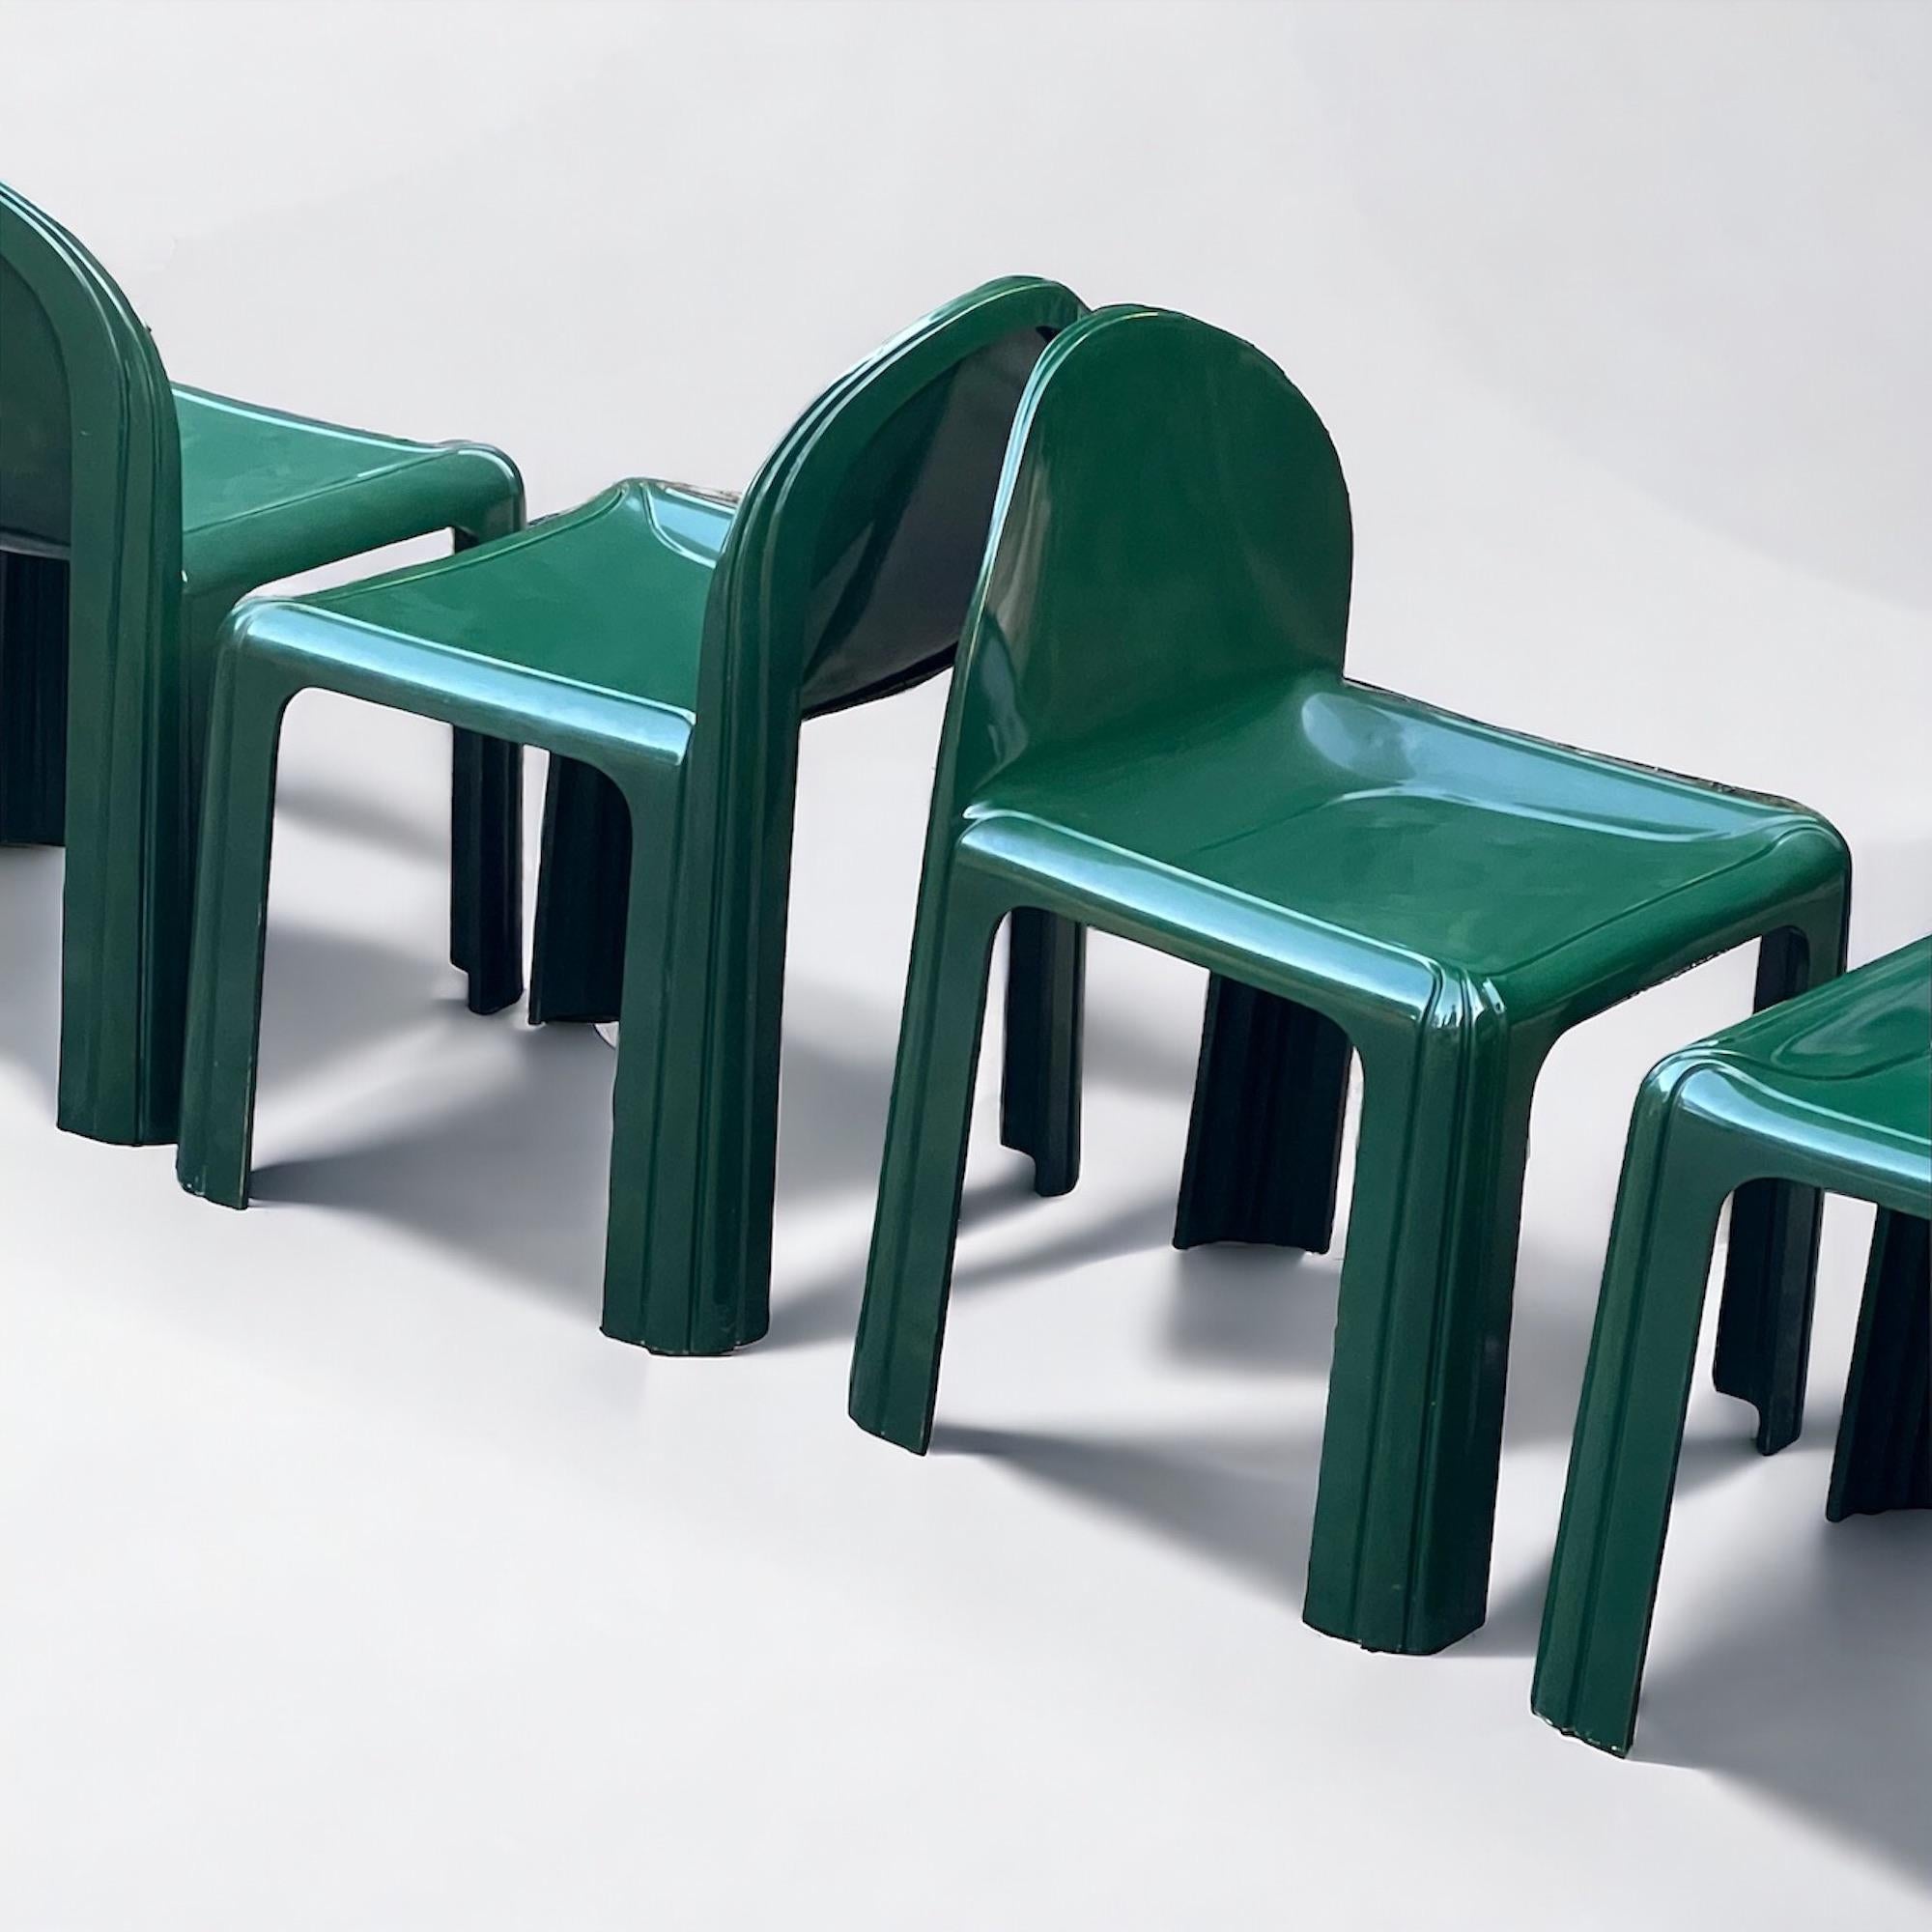 Set of 4 Green Resin Kartell Model 4854 Chairs by Gae Aulenti, 1960s For Sale 2